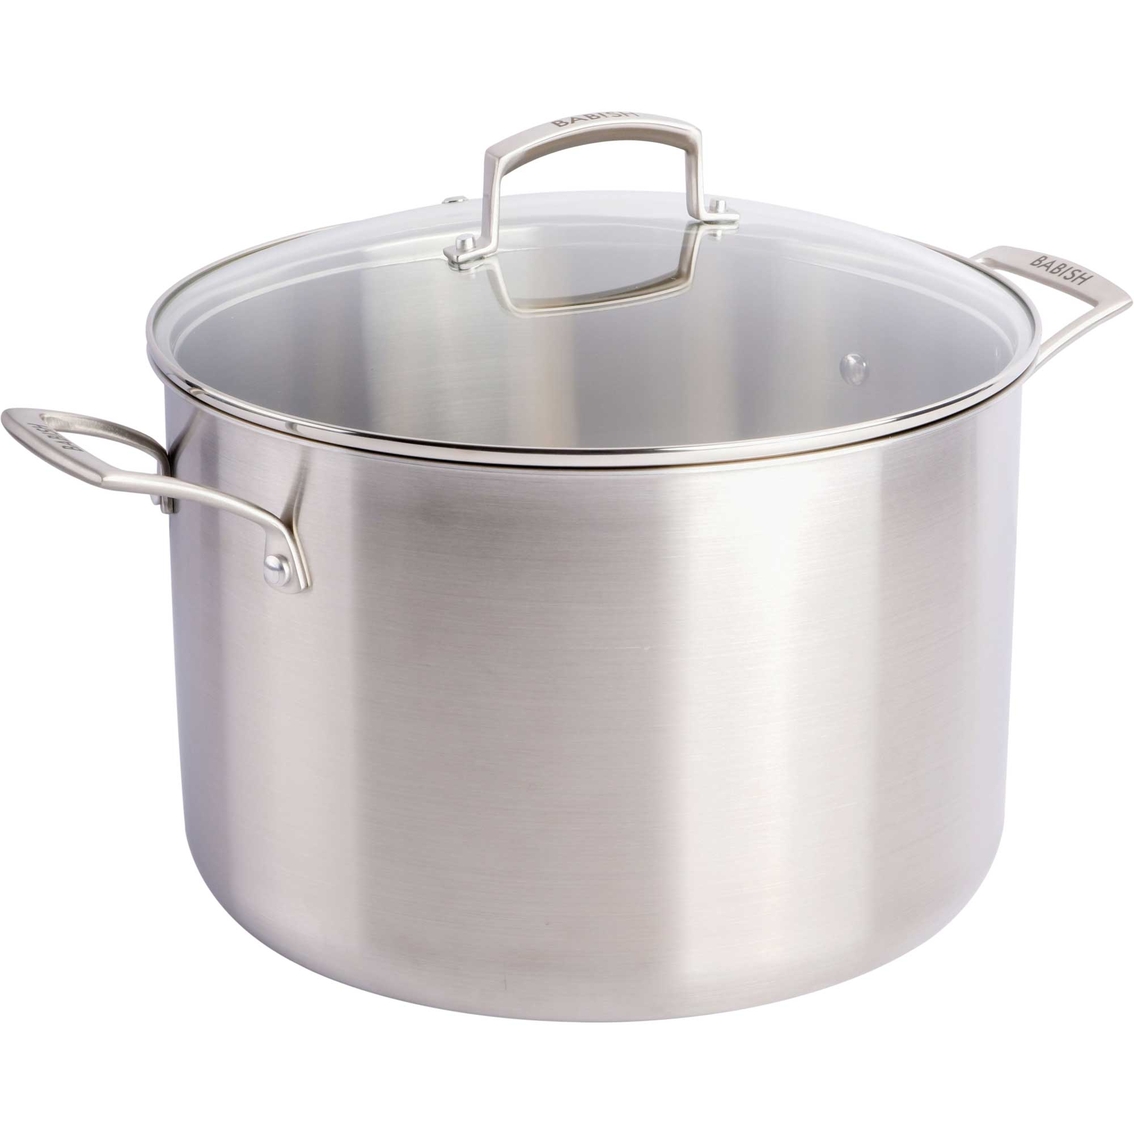 Babish 12 Qt. Tri Ply Stainless Steel Stock Pot With Lid | Stock Pots ...